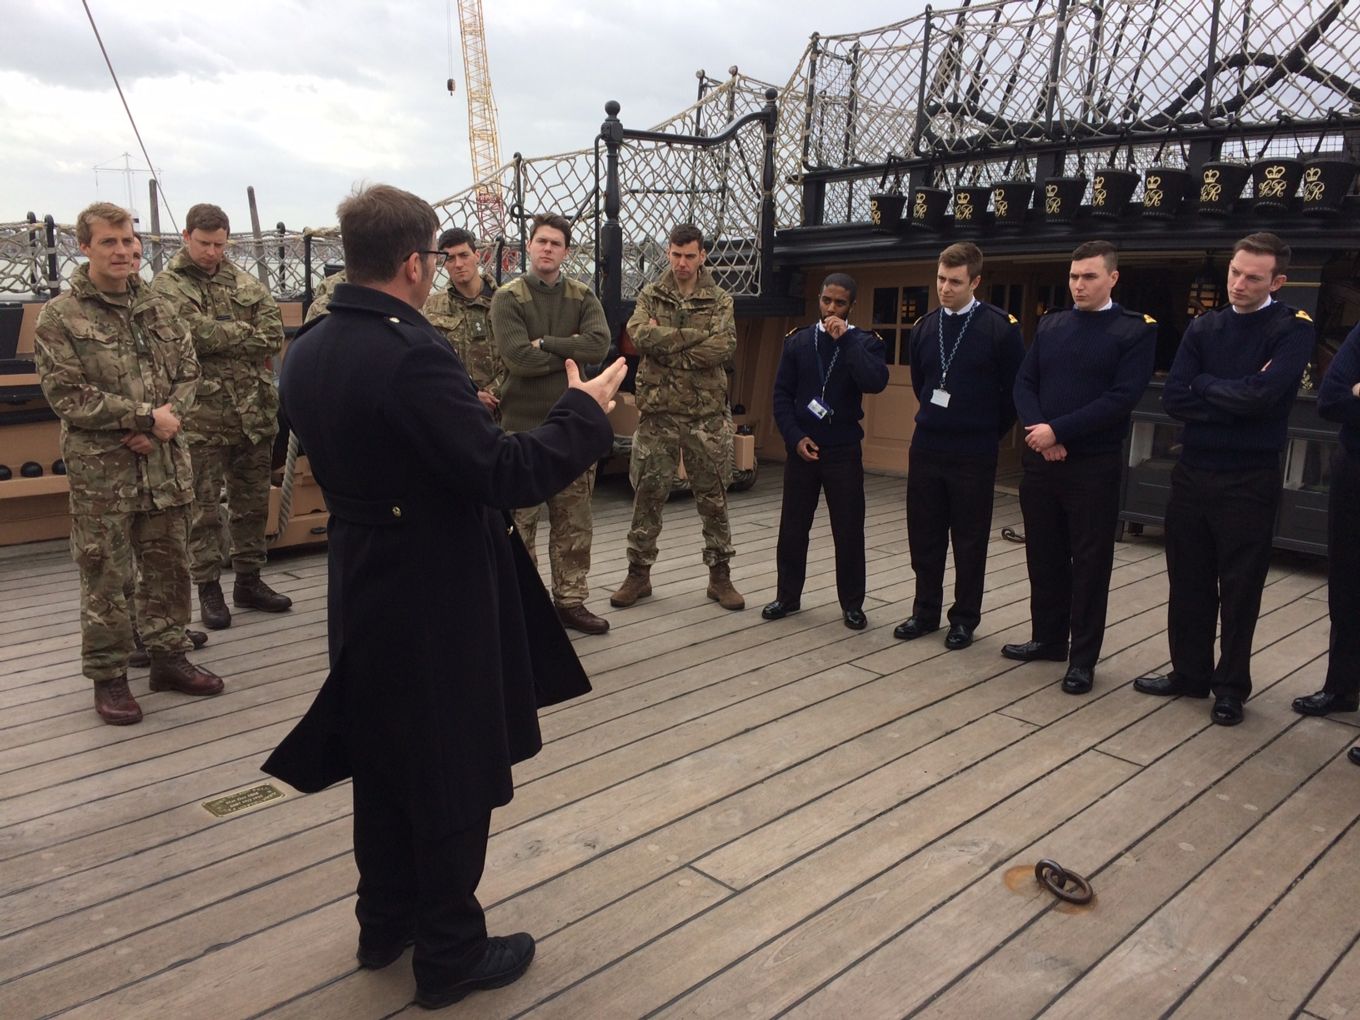 Students on board the HMS Victory